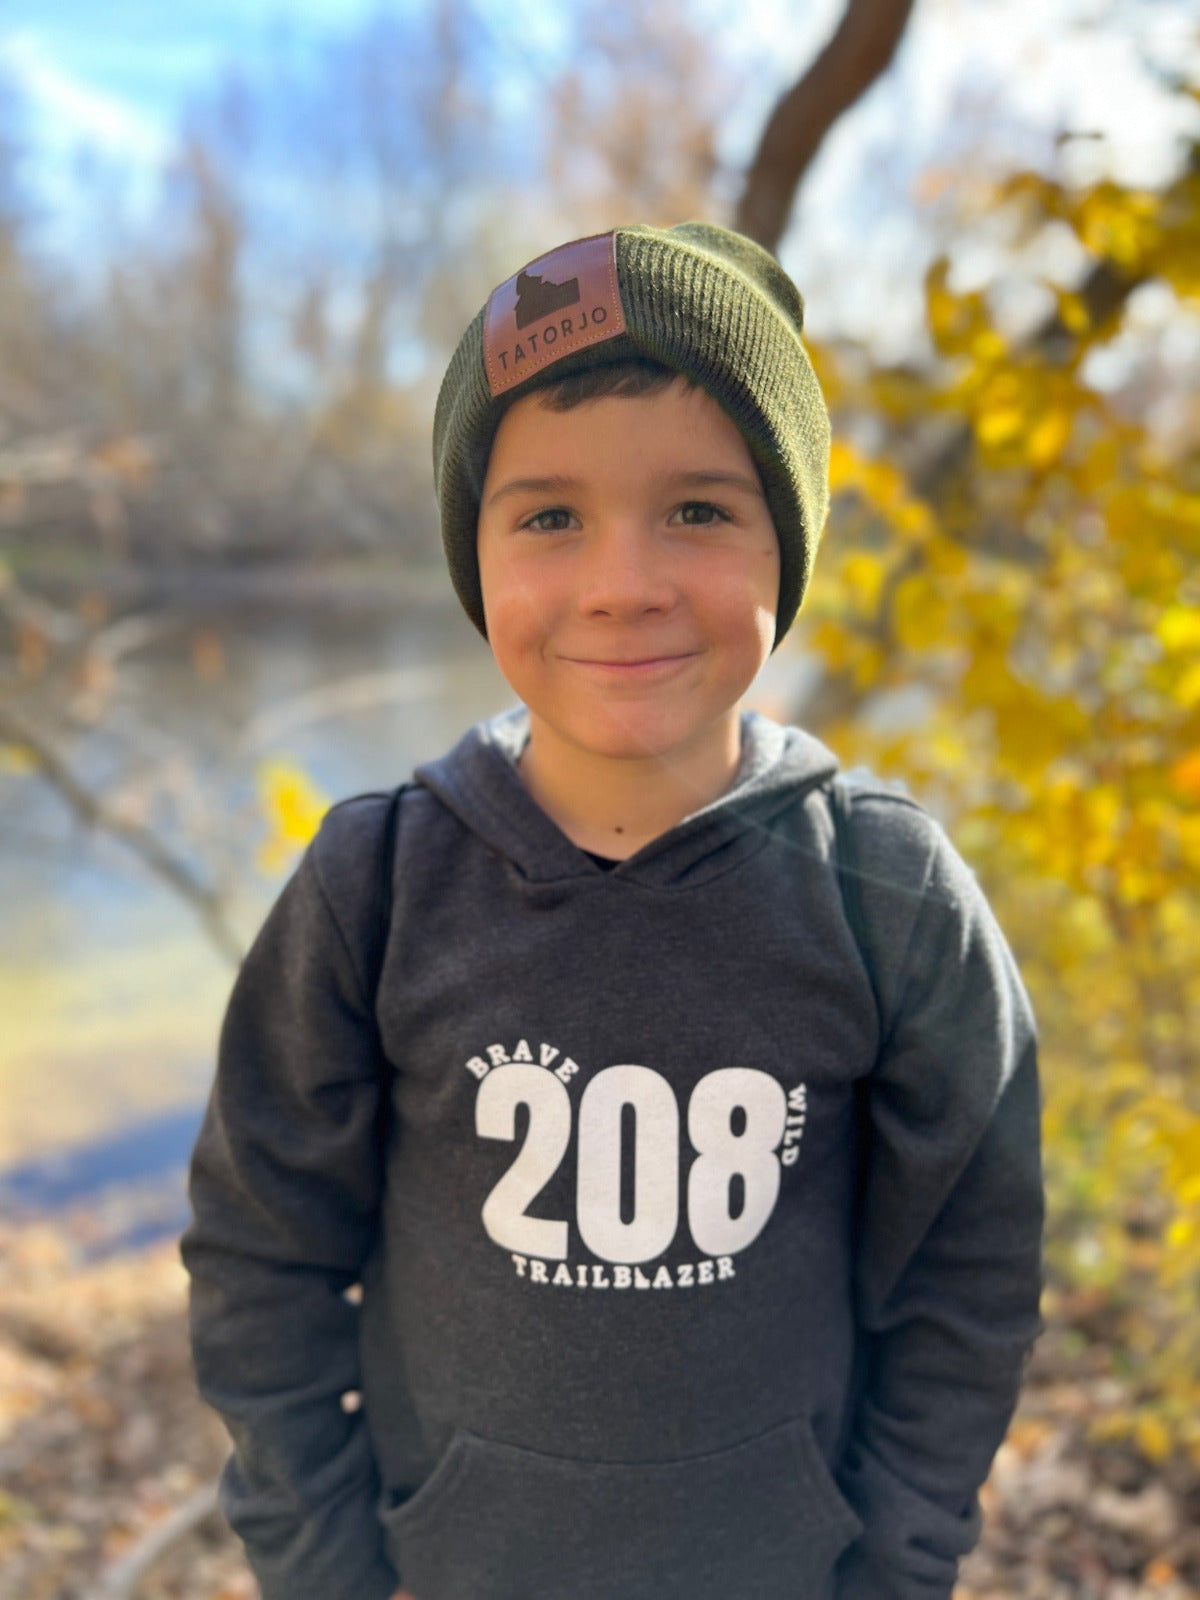 Idaho boy in sweatshirt or hoodie wearing a hoodie that says 208. Idaho apparel is for adventure kids. Idaho Kids are full of adventure. The hoodie stands for Idaho. Idaho clothing is comfy and cozy.'